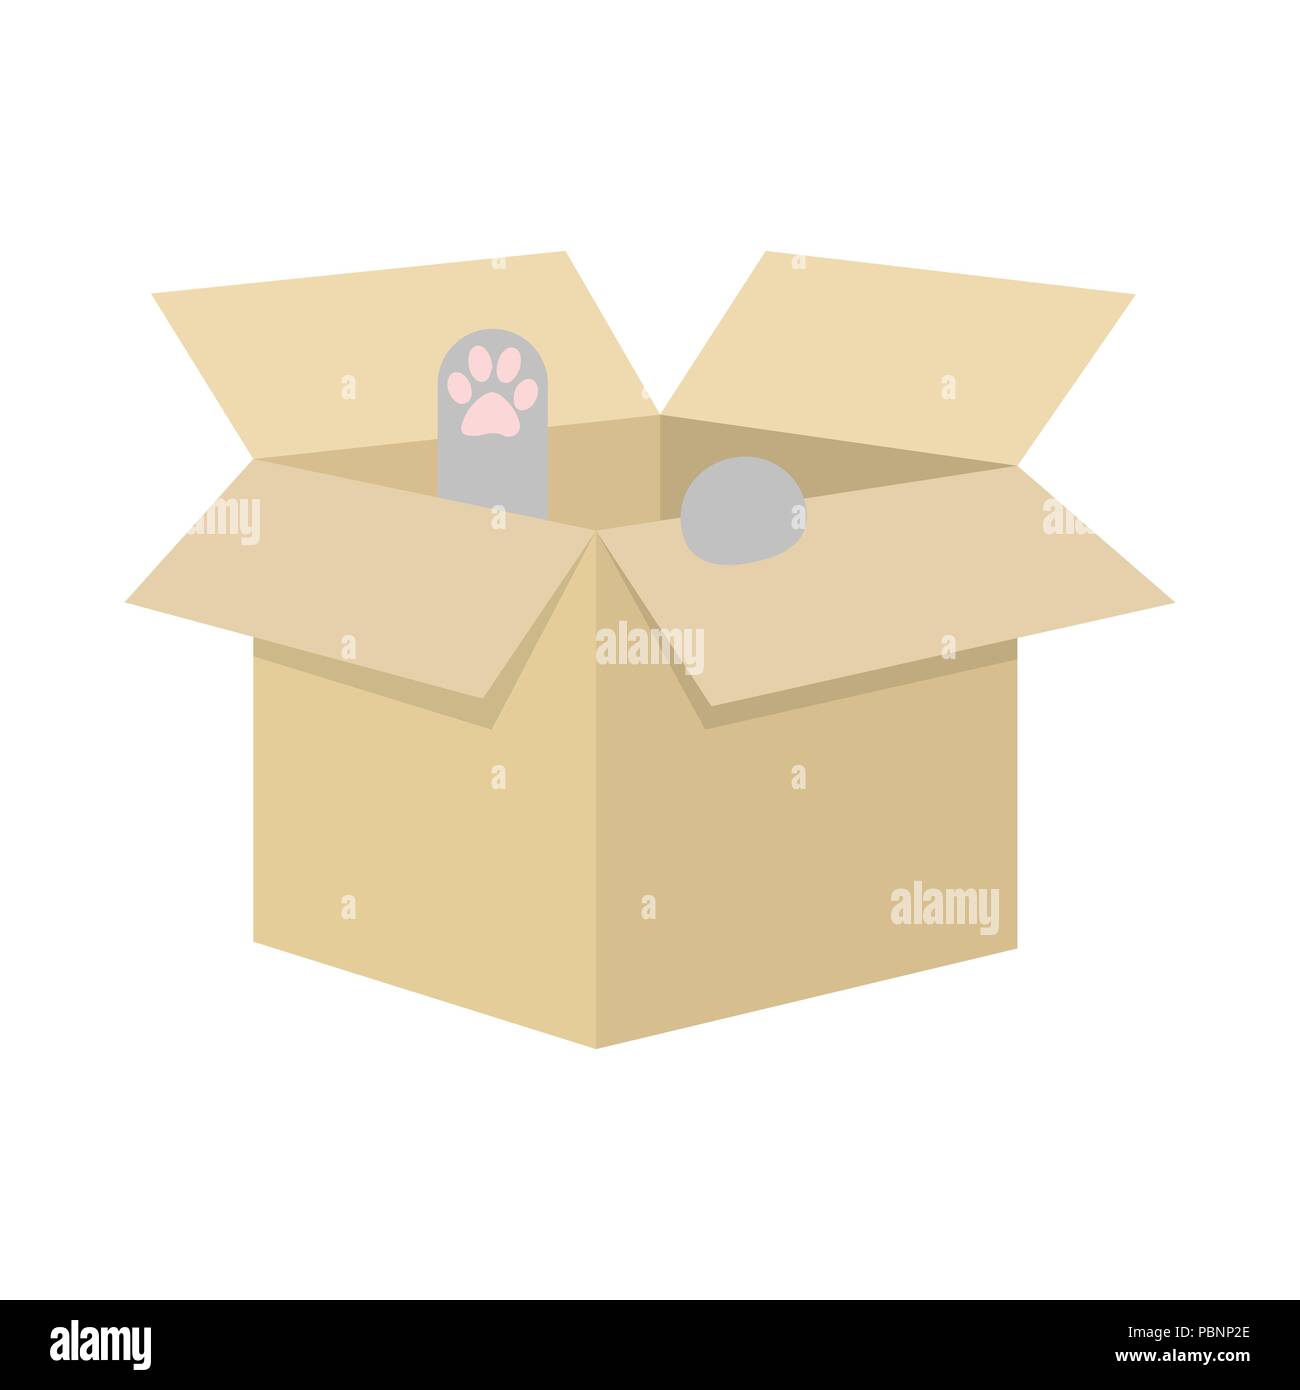 a,animal,background,box,cardboard,carton,cartoon,cat,concept,container,cute,domestic,drawing,element,equipment,feline,gift,gray,hide,icon,illustration,in,isolated,kitten,kitty,logo,open,package,pet,playful,small,symbol,tabby,tail,tool,vector,web,white  ...